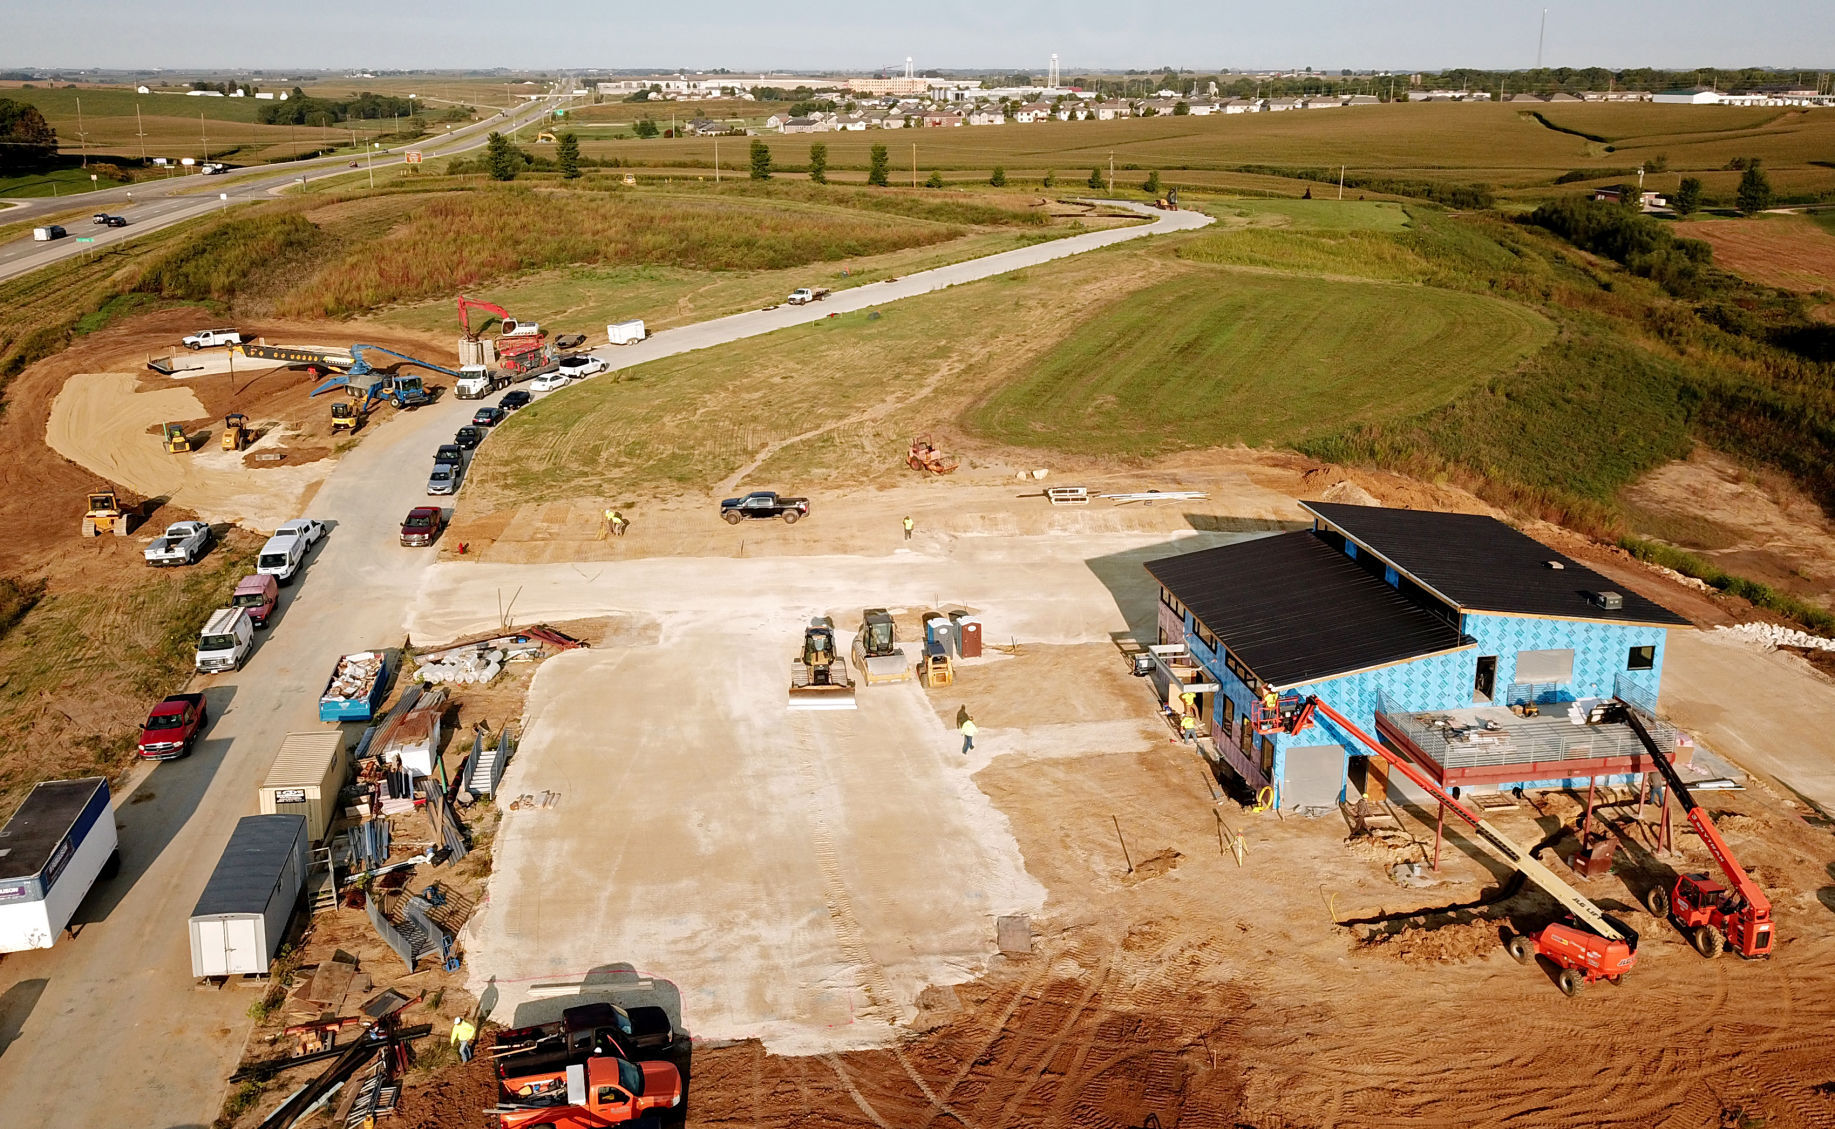 Construction continues on a new Jumble Coffee Co. location (left) and the Darkbird Taproom (right) along Thunder Valley Drive between Thunder Hills and Cox Springs roads in Peosta, Iowa, on Friday.    PHOTO CREDIT: JESSICA REILLY